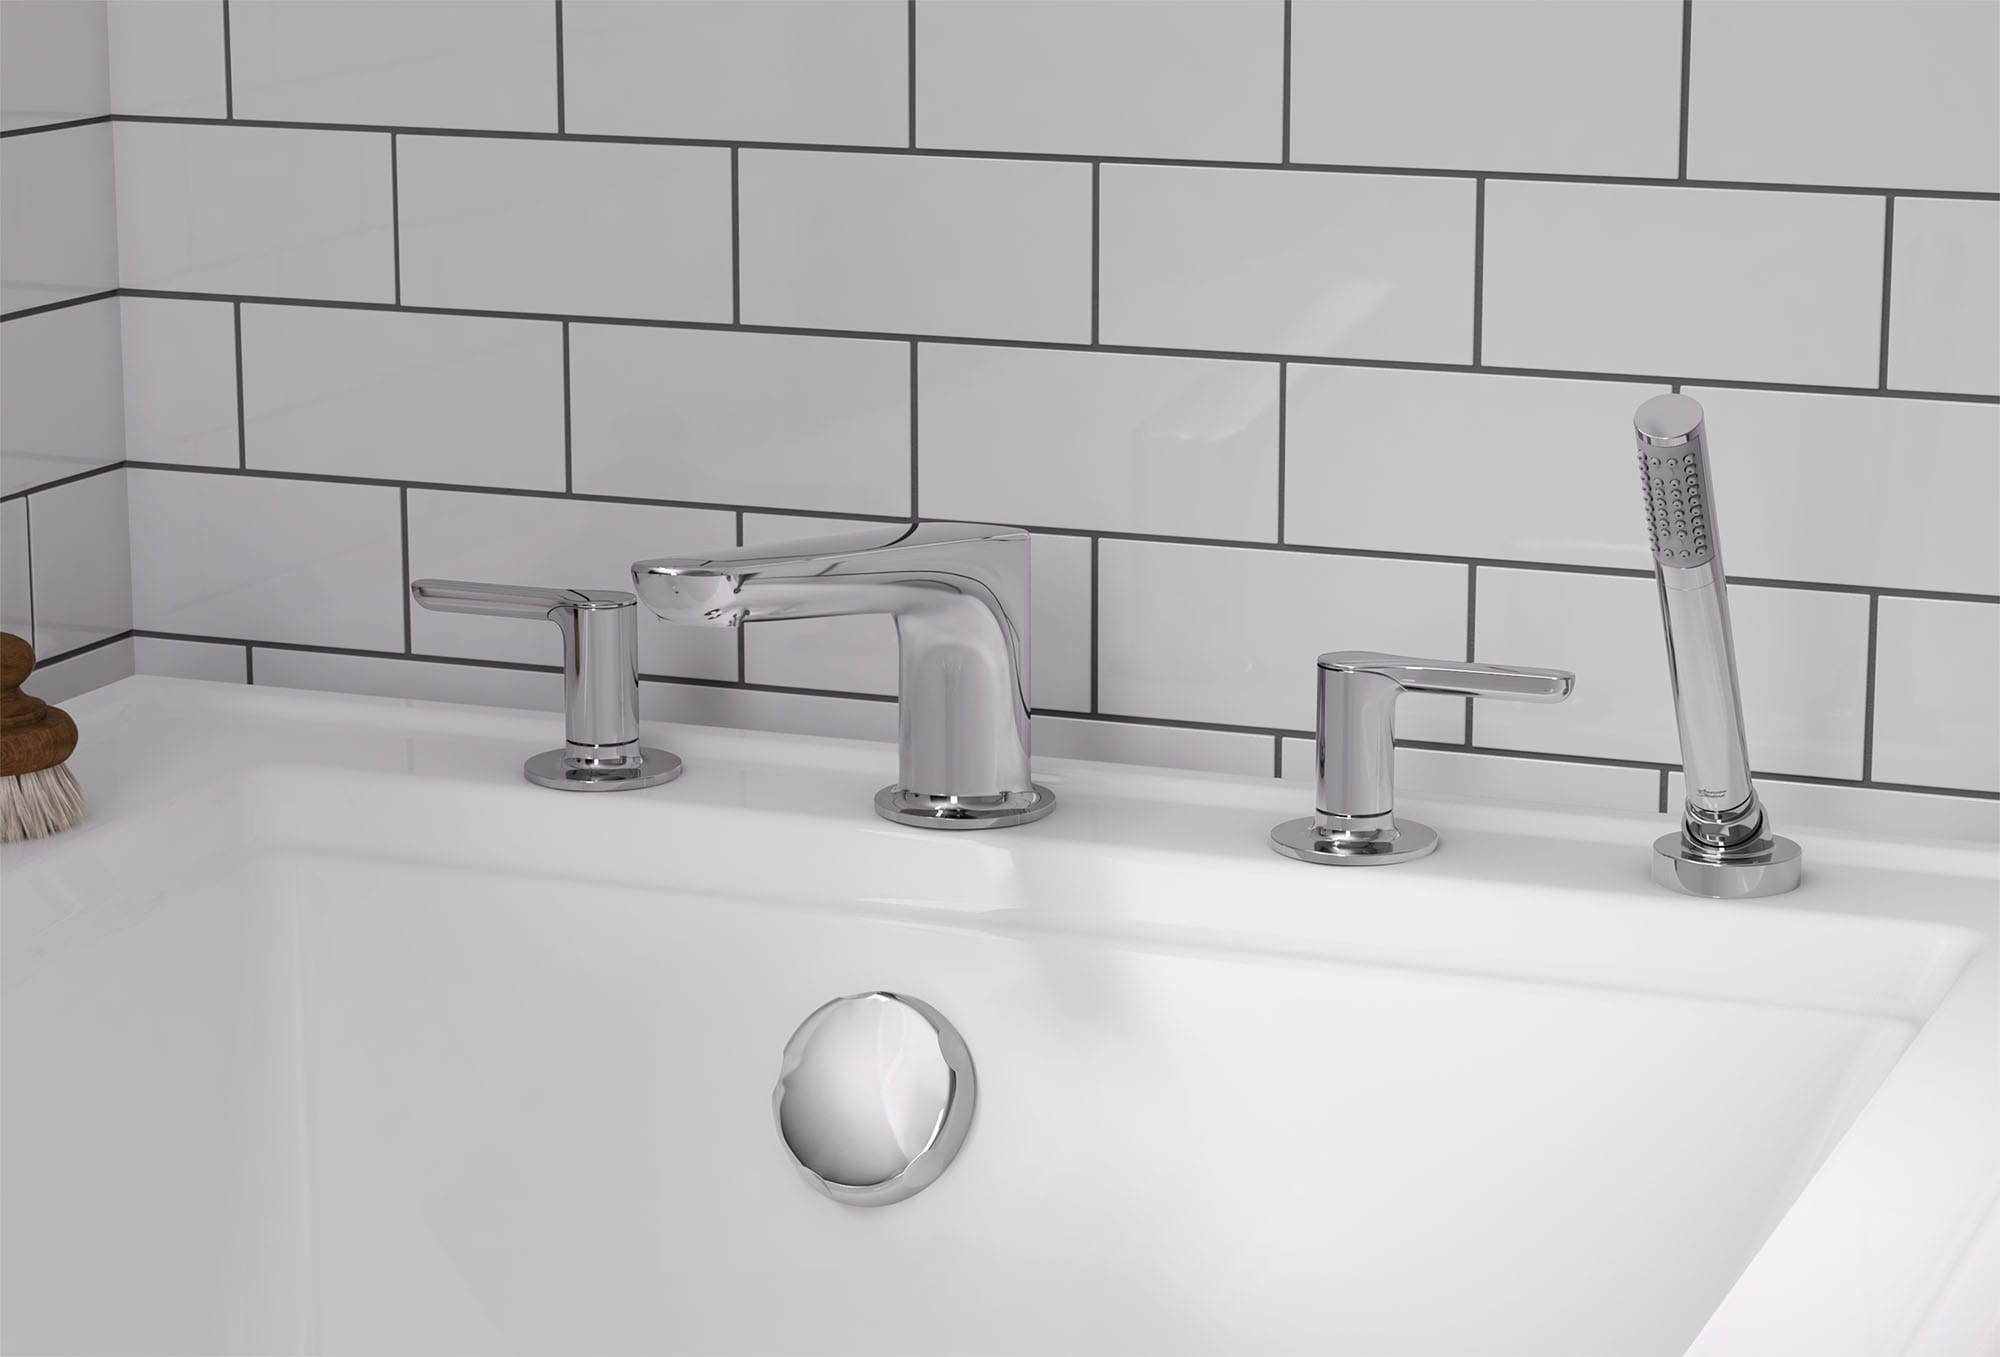 Studio S  Bathtub Faucet With Lever Handles and Personal Shower for Flash Rough In Valve CHROME